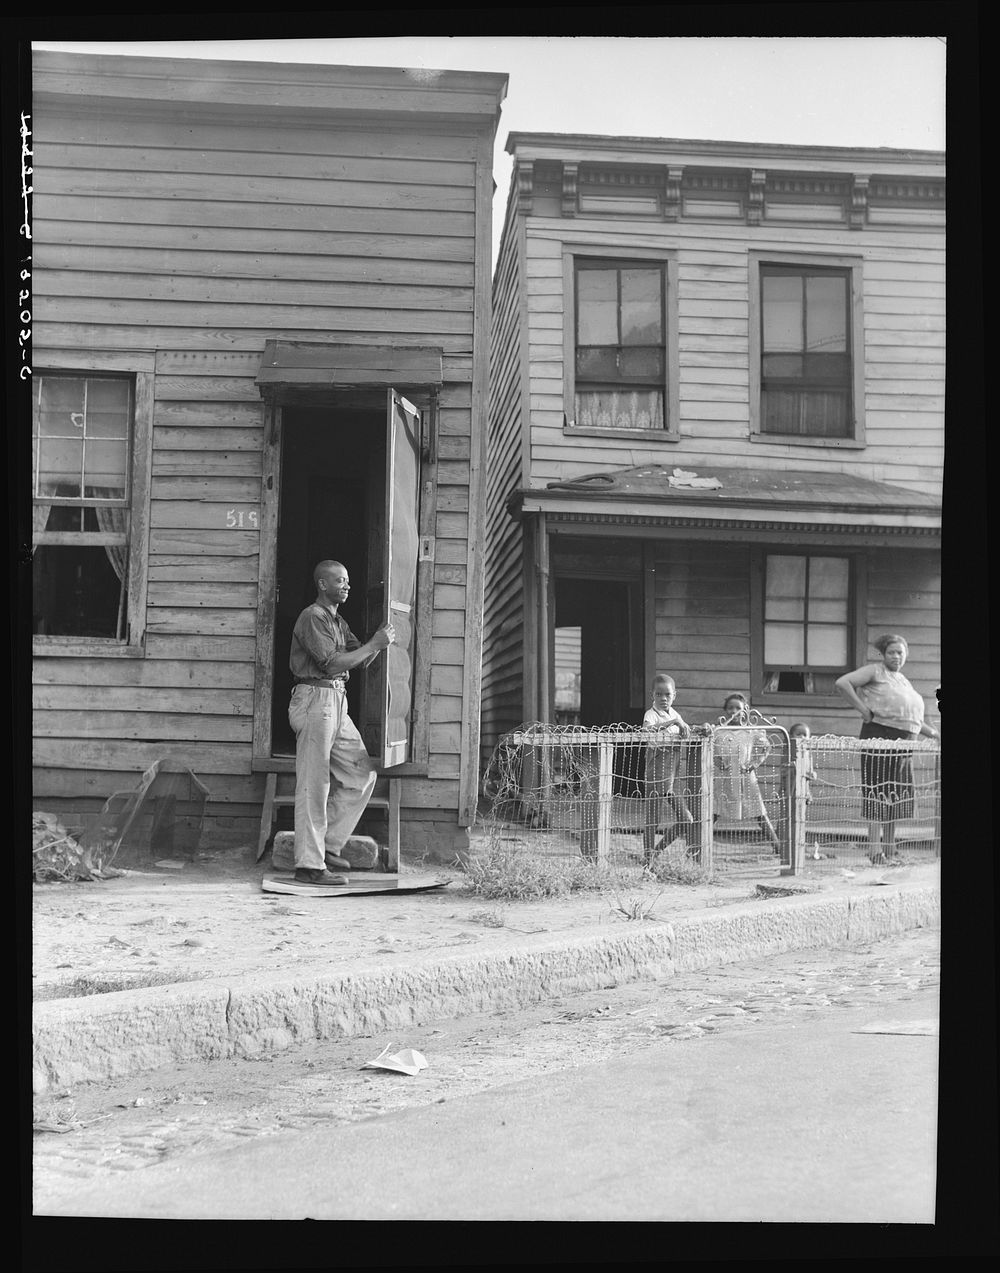 Housing. Richmond, Virginia. Twelve dollars a month for three rooms. Sourced from the Library of Congress.